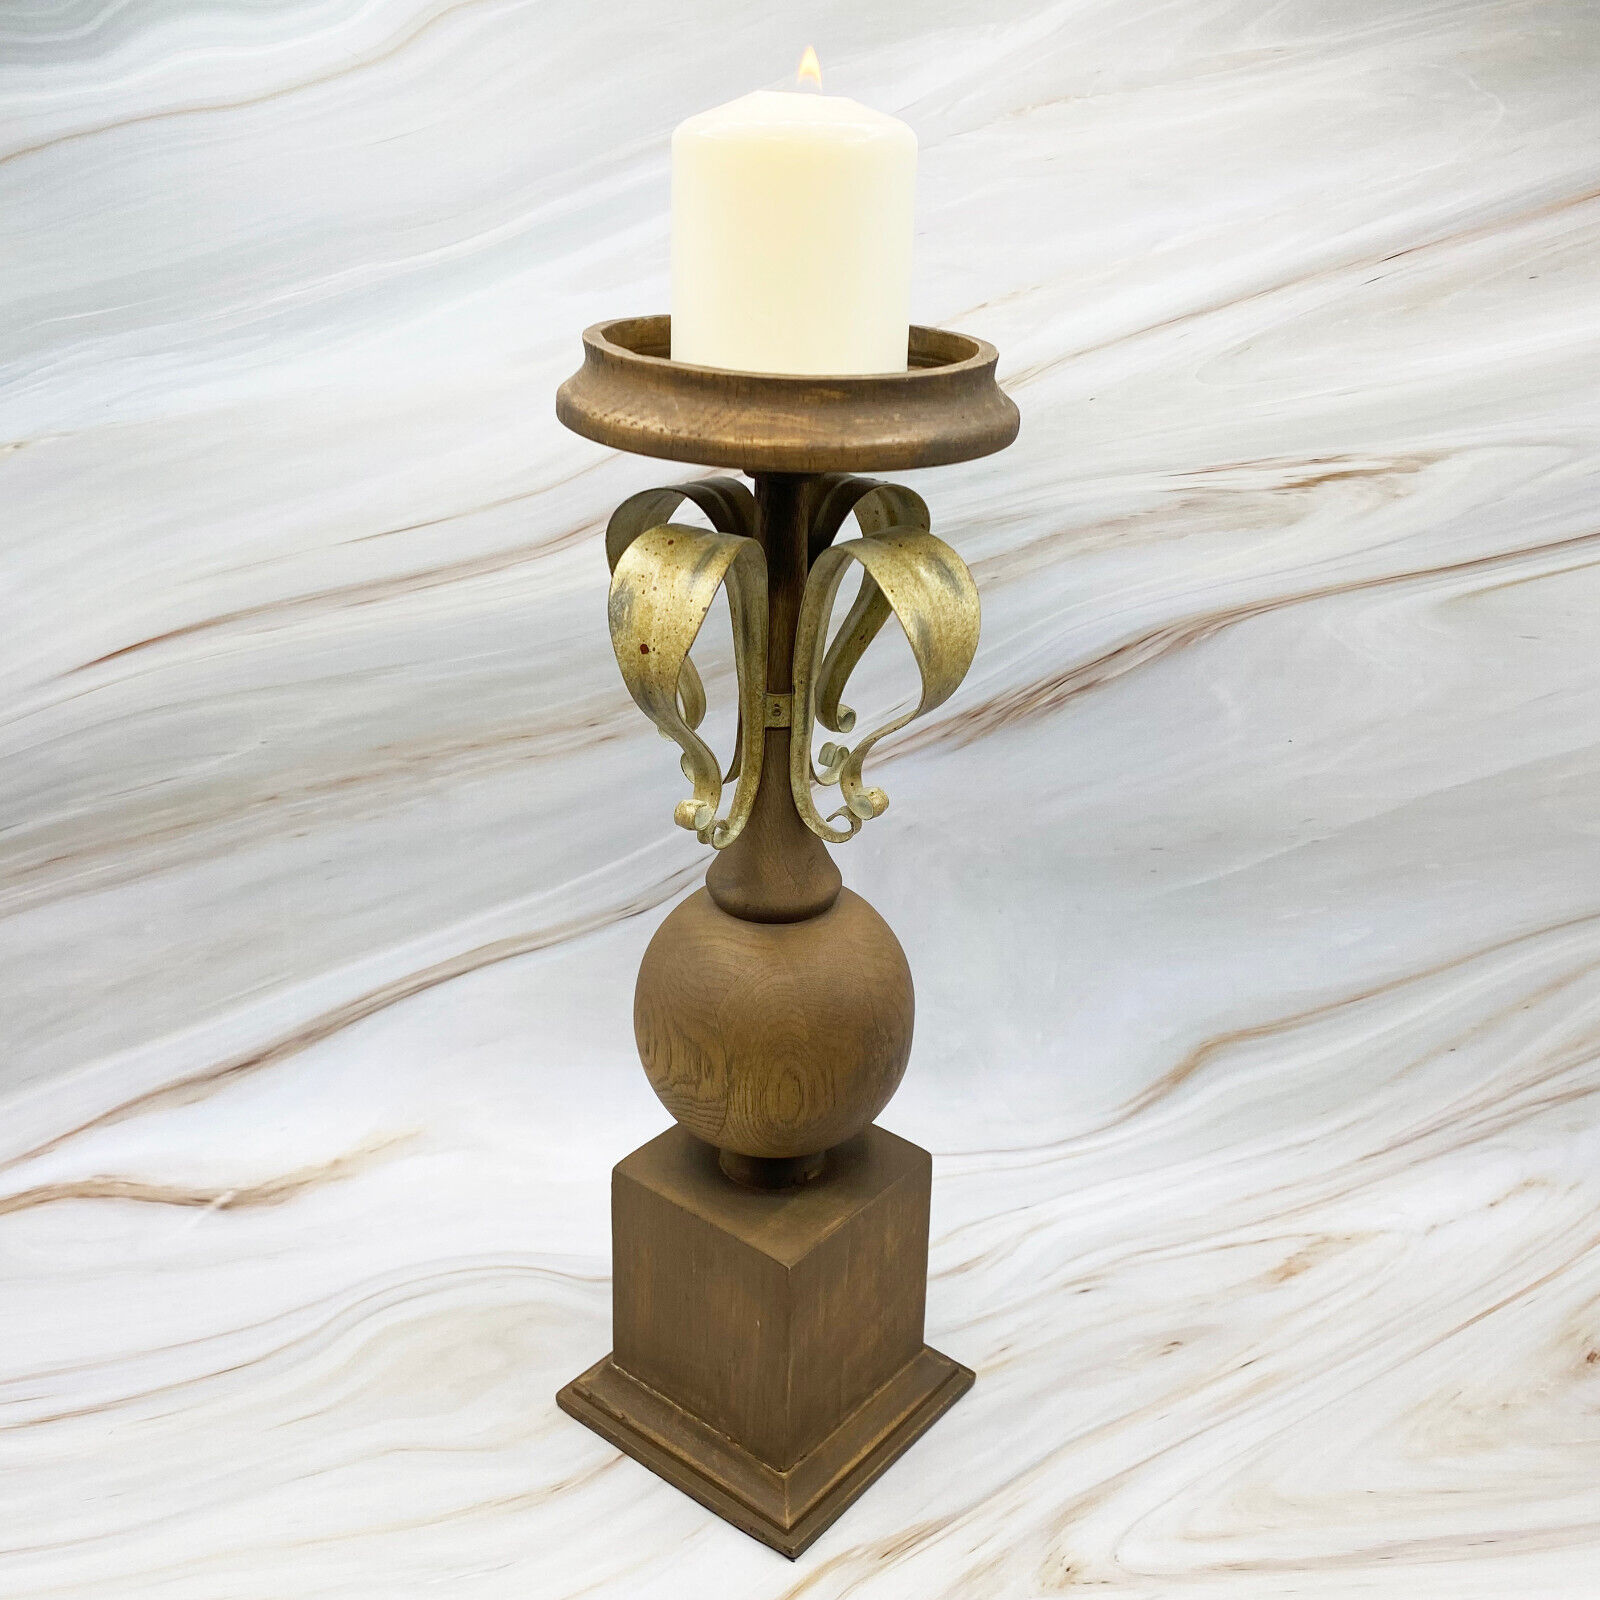 GLOBAL VIEWS Vintage Tall Turned Wood Candle Holder with Metal Scroll Leaves